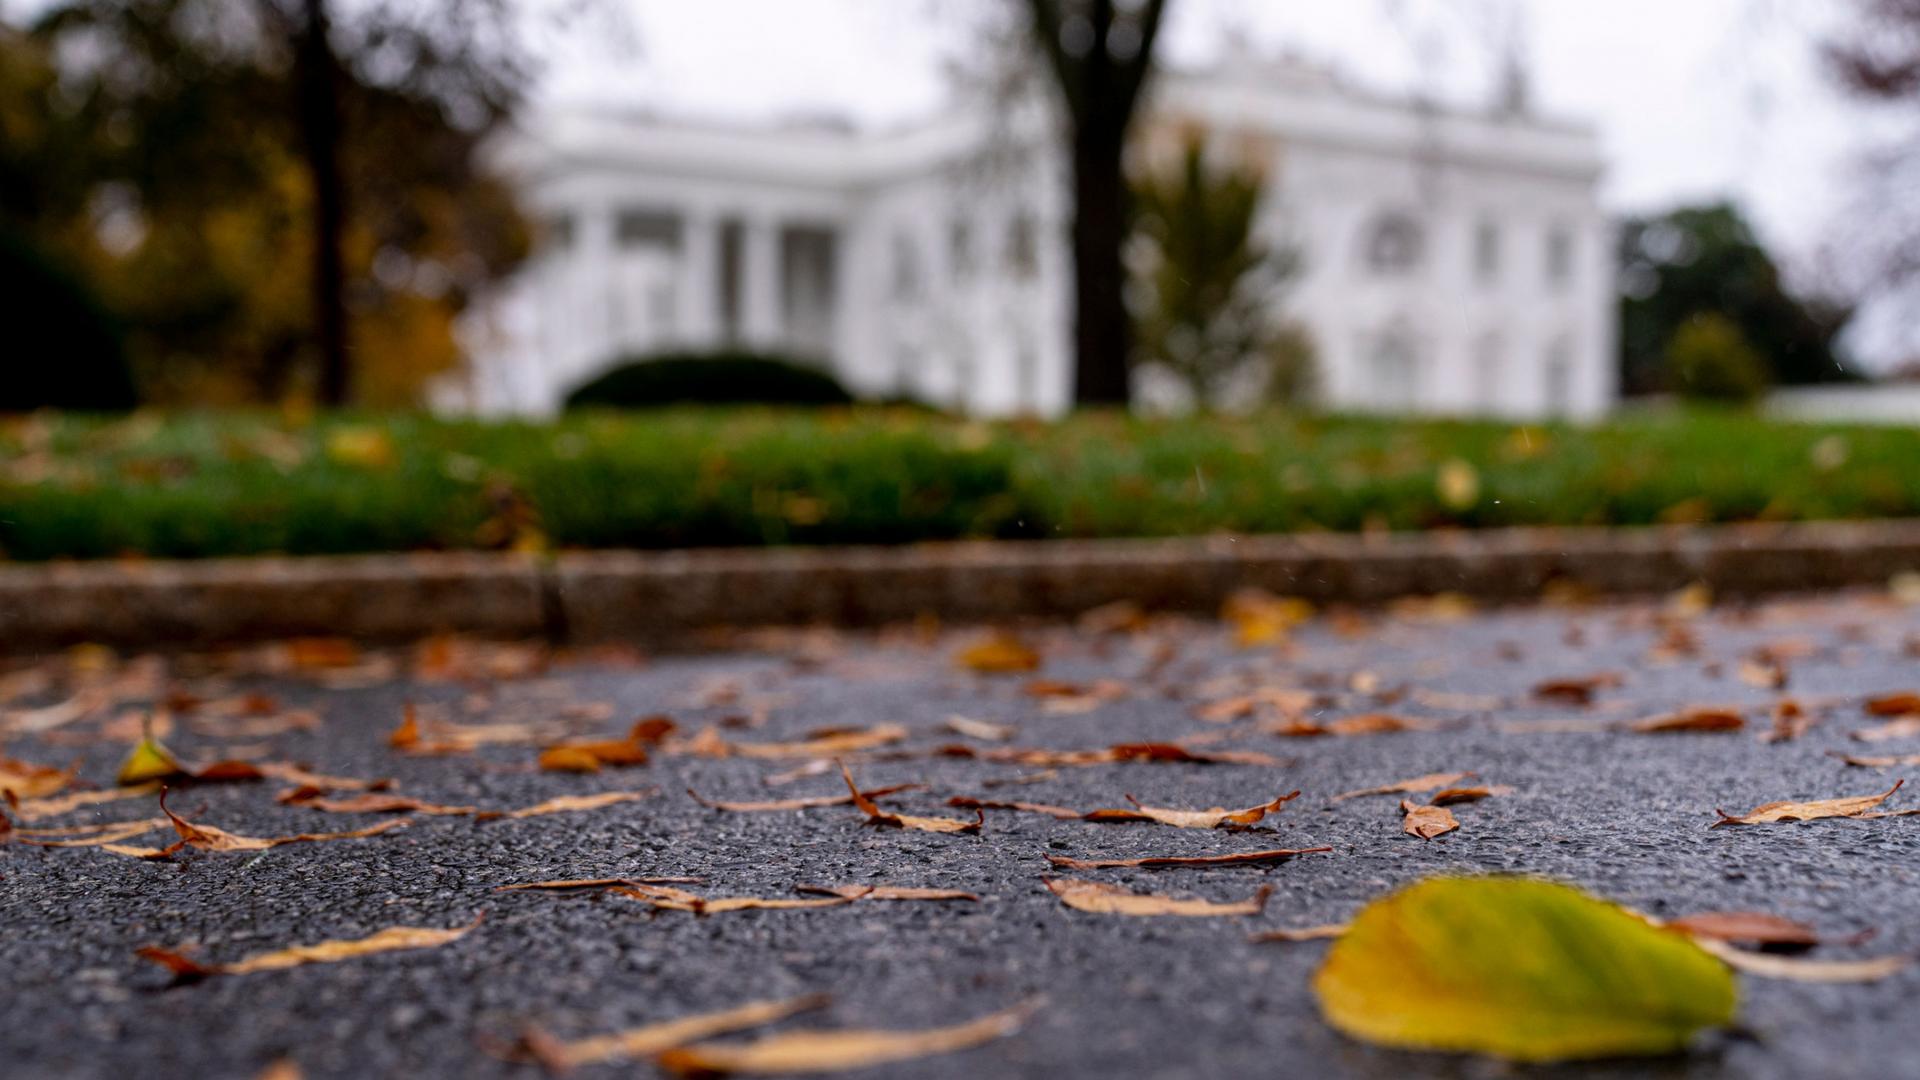 Leaves lie on the ground in focus with the White House in the distance in soft focus.